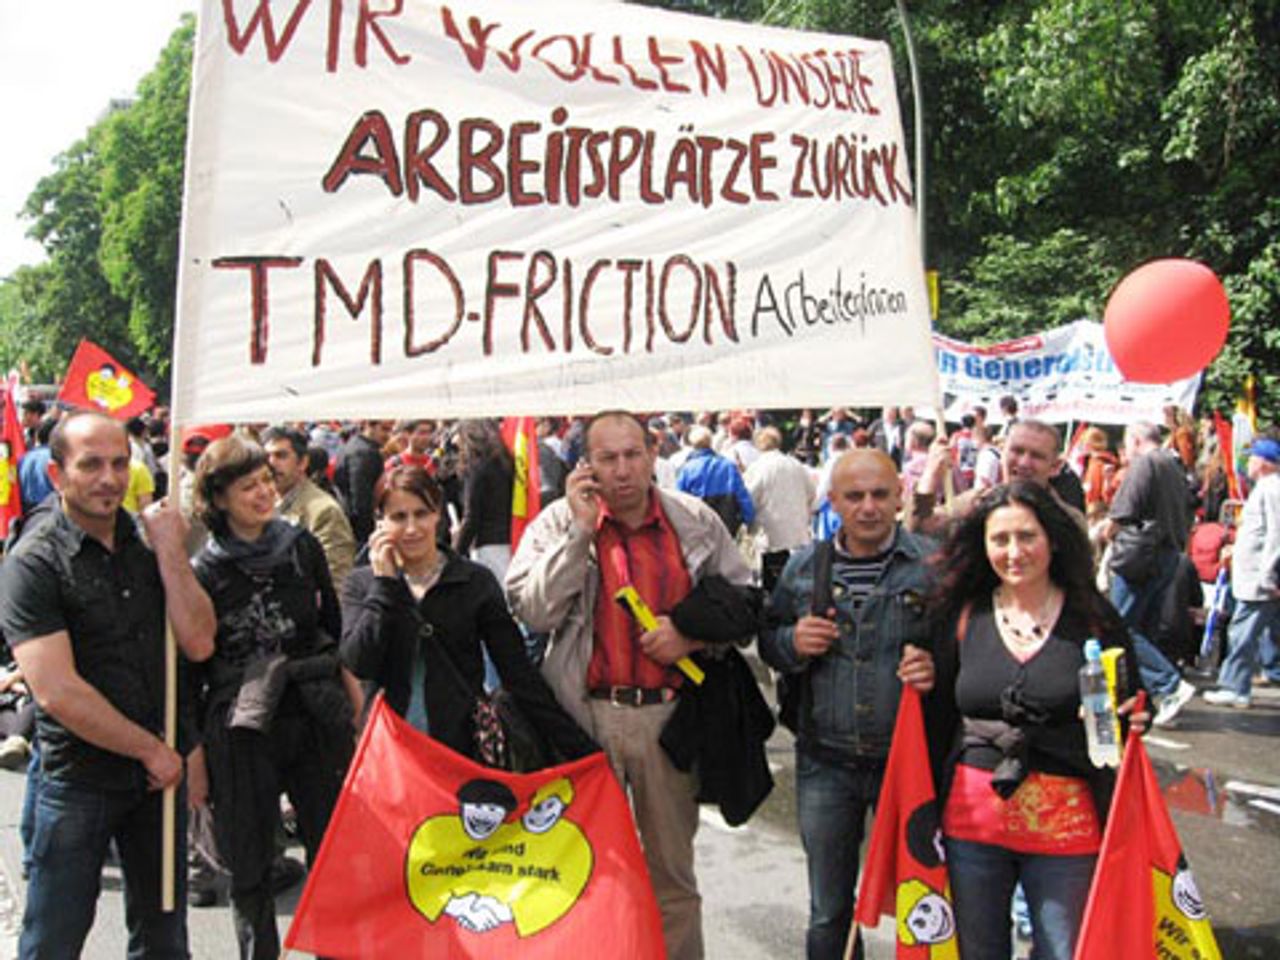 Sacked workers on the demonstration